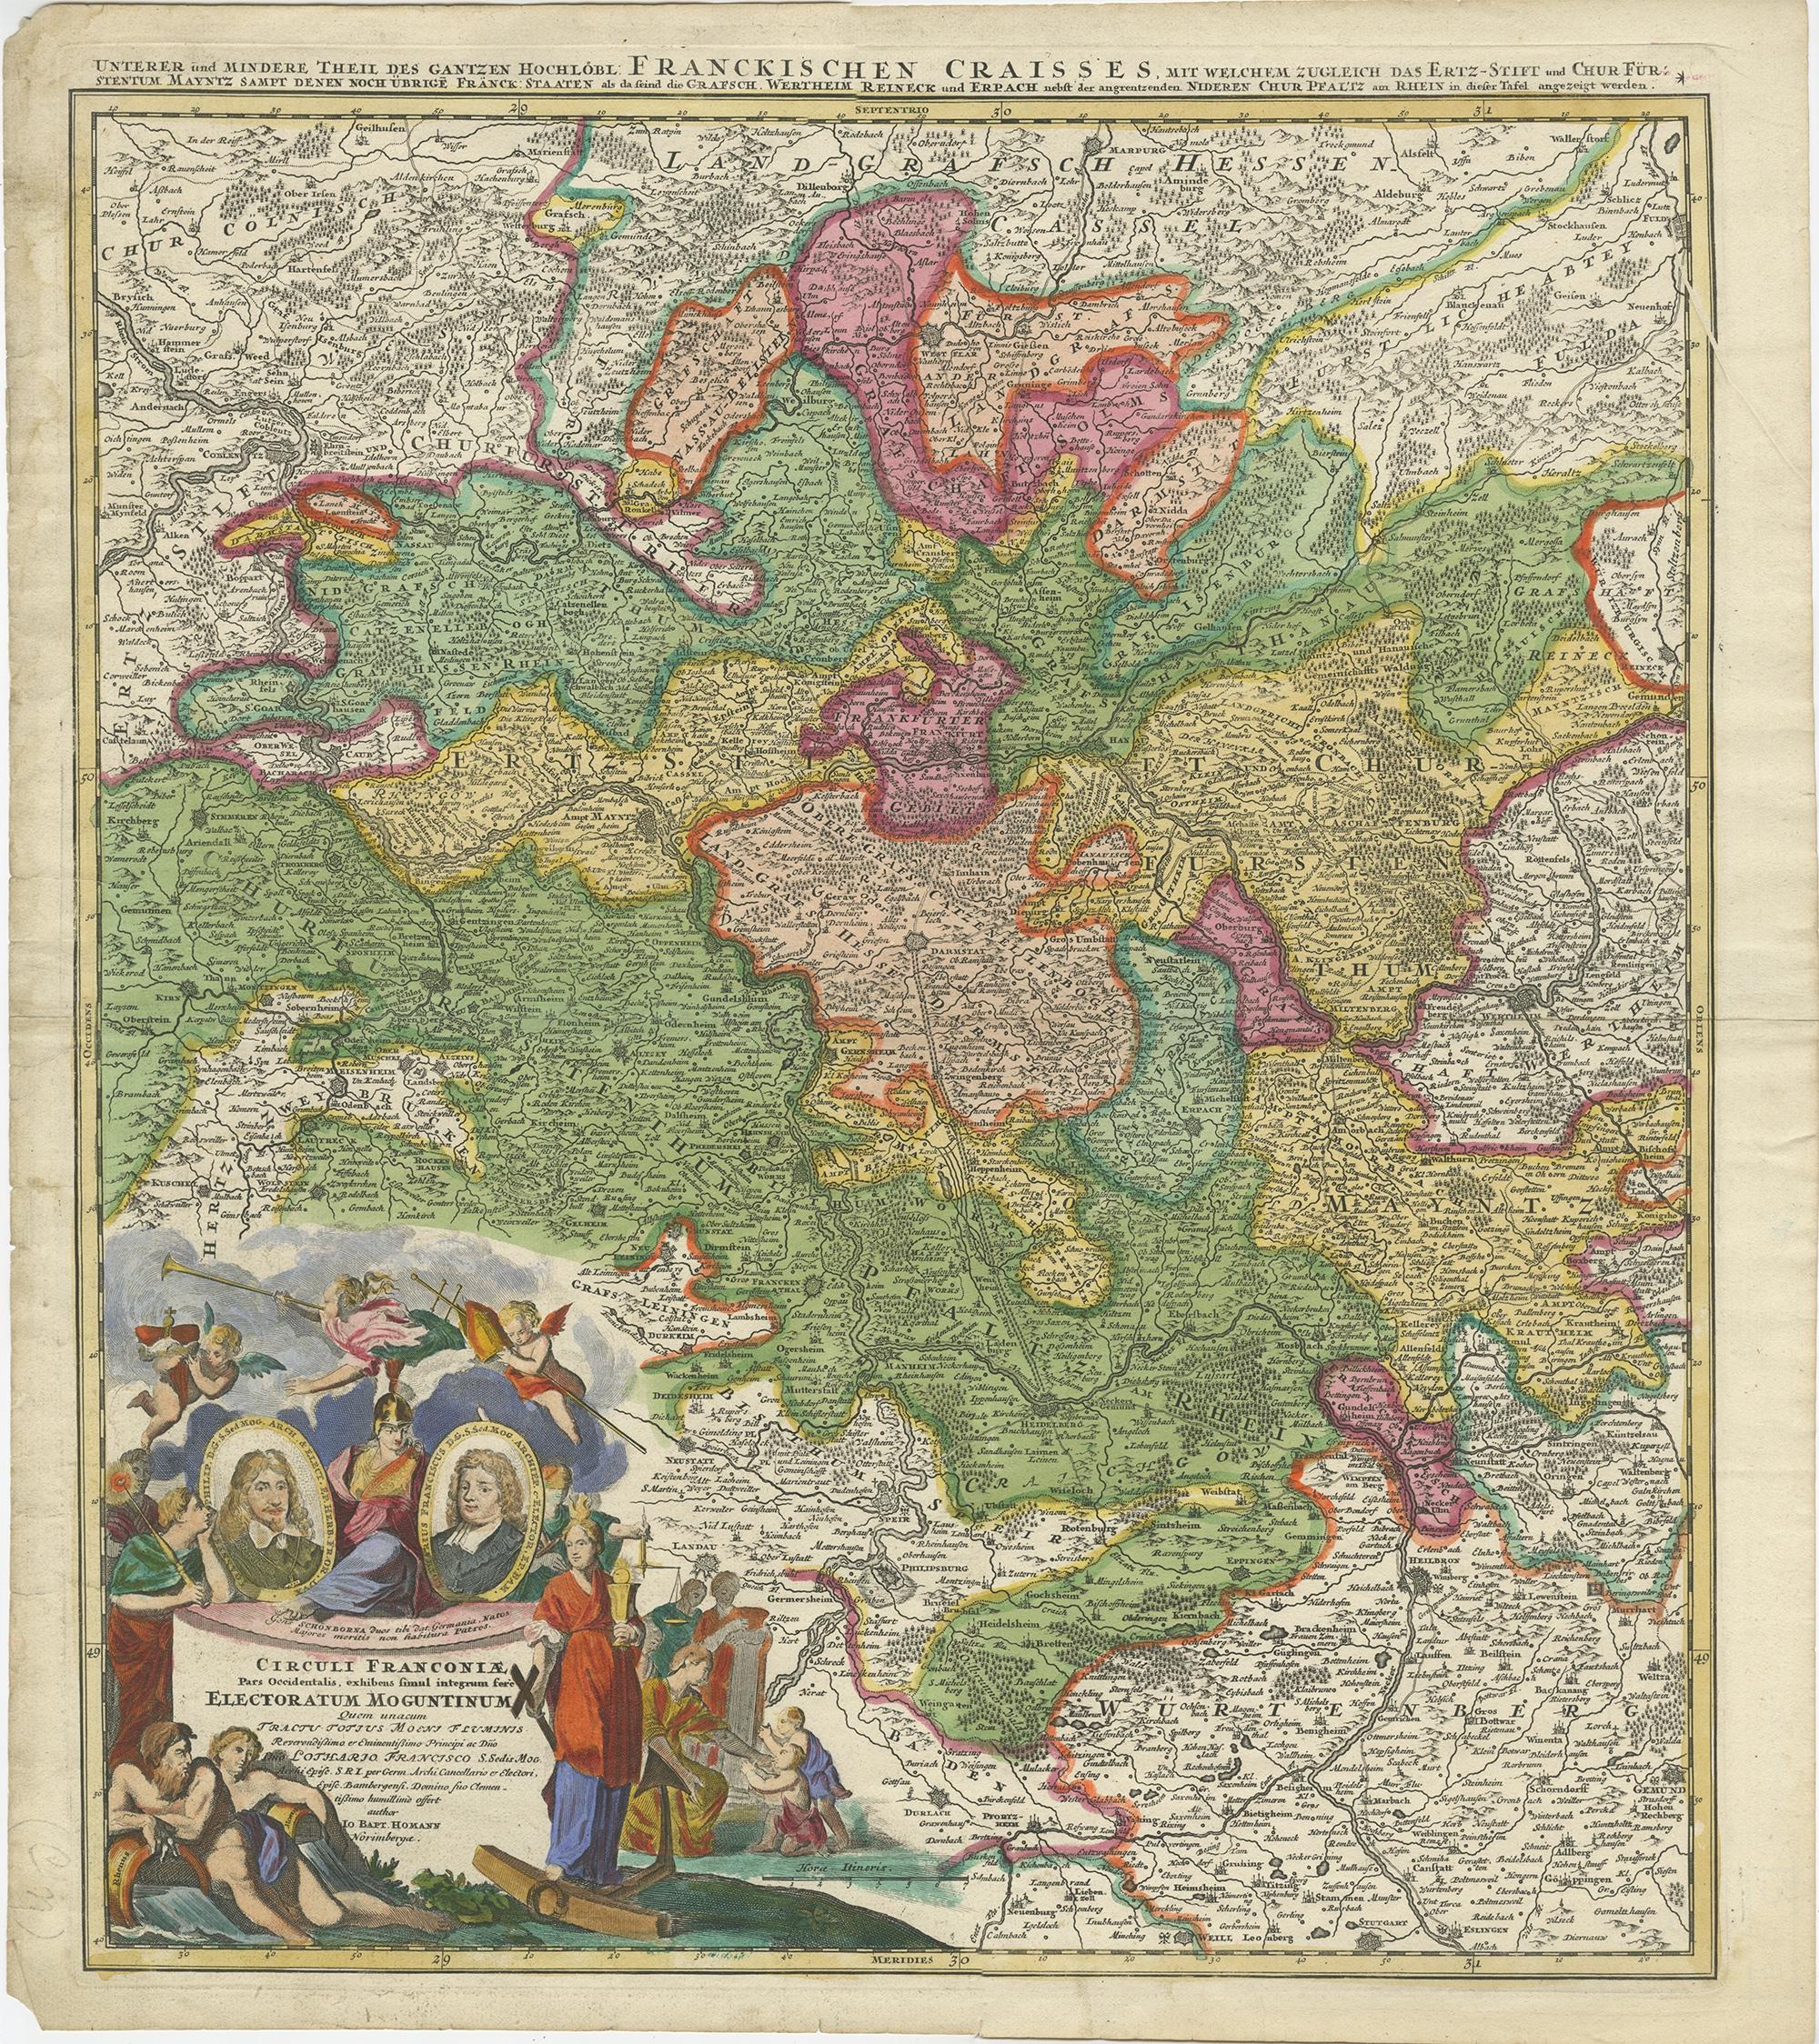 Antique map titled 'Circuli Franconiae pars Occidentalis, exhibes simul integrum fere Electoratum Moguntinum (..)'. 

Antique map centered on Nuremberg and Bamberg. Extends from the Donau in the South (showing Regensberg, Ingolstatt and